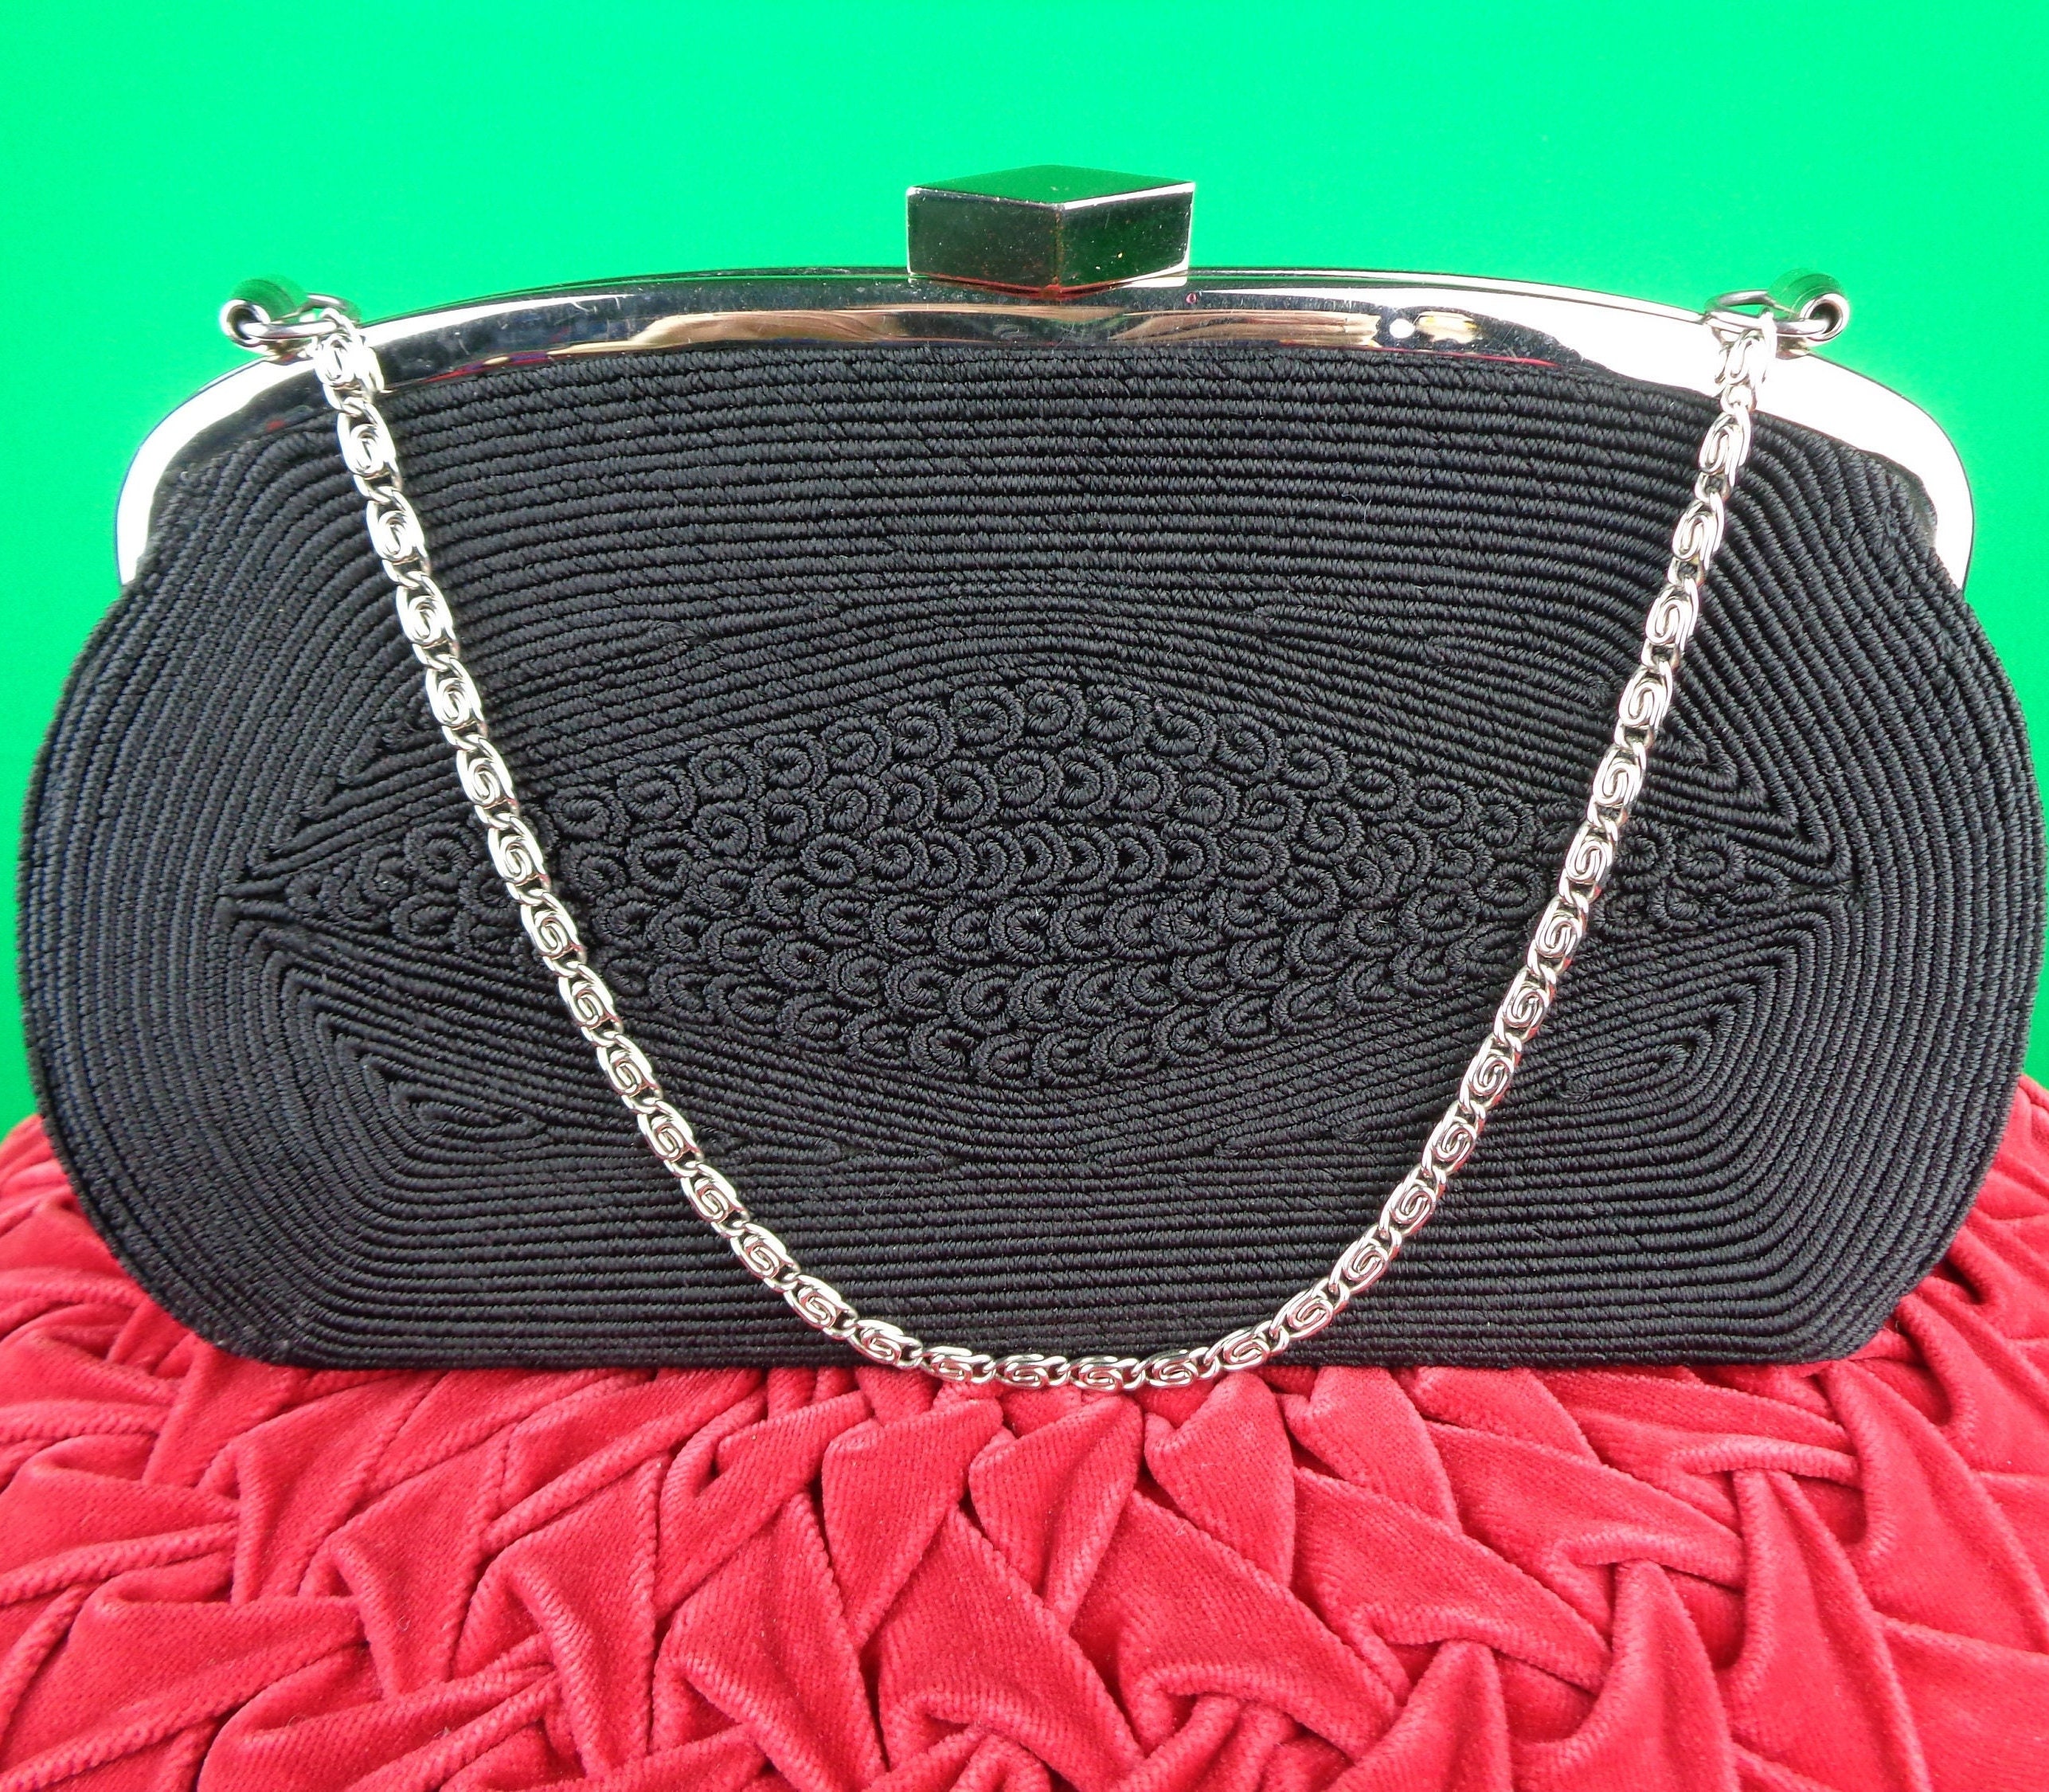 Vintage 30s/40s Black Clutch Evening Bag Purse Pin Up Wwii by